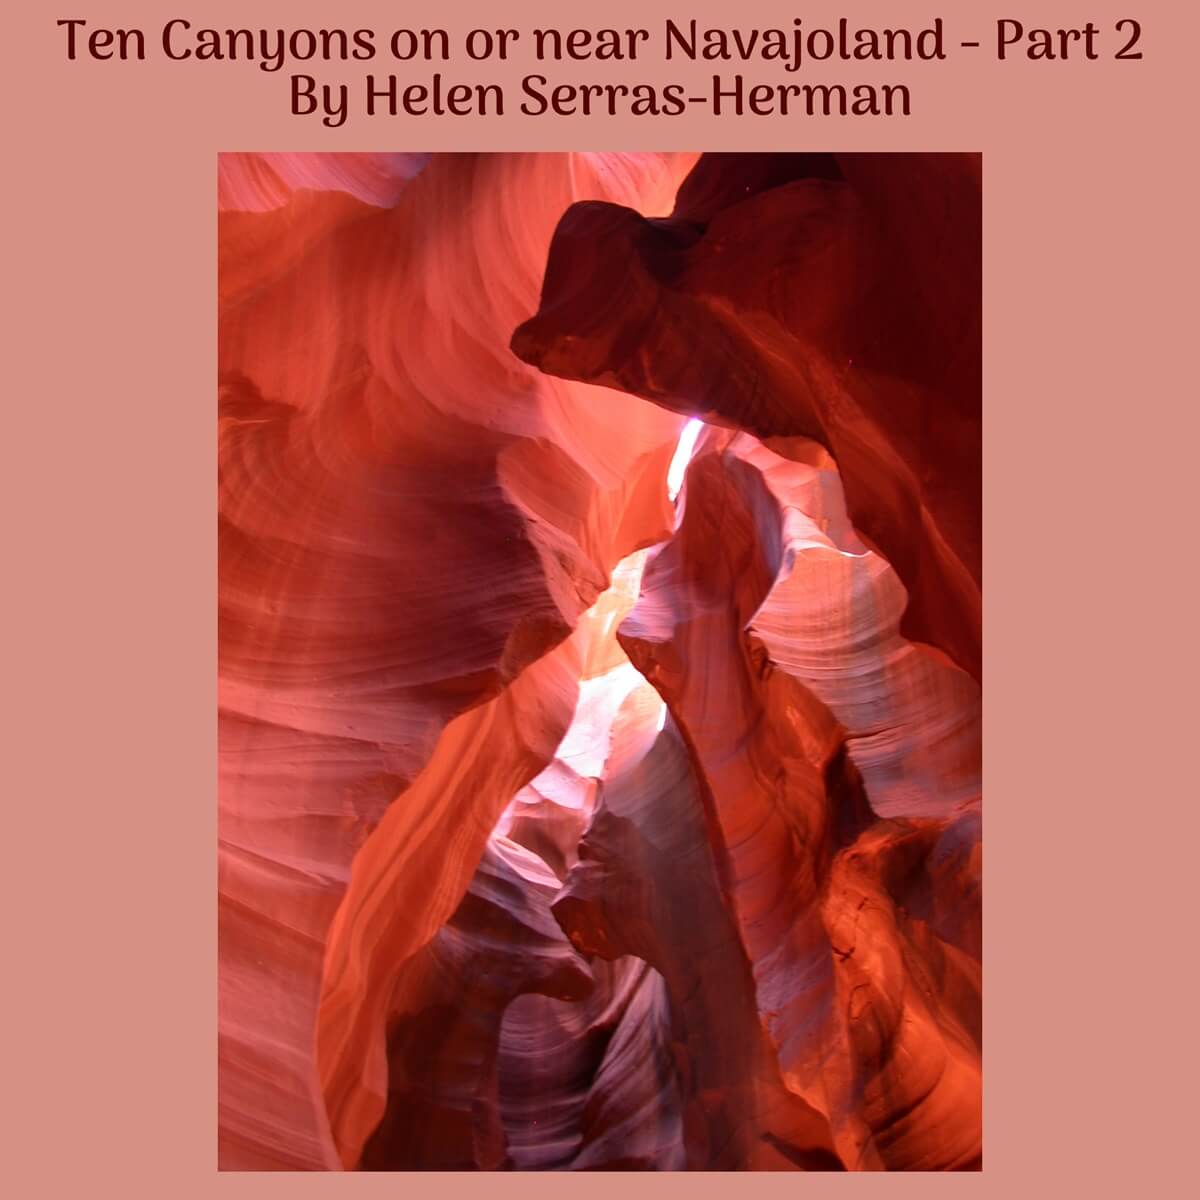 Ten Canyons on or near Navajoland - Part 2